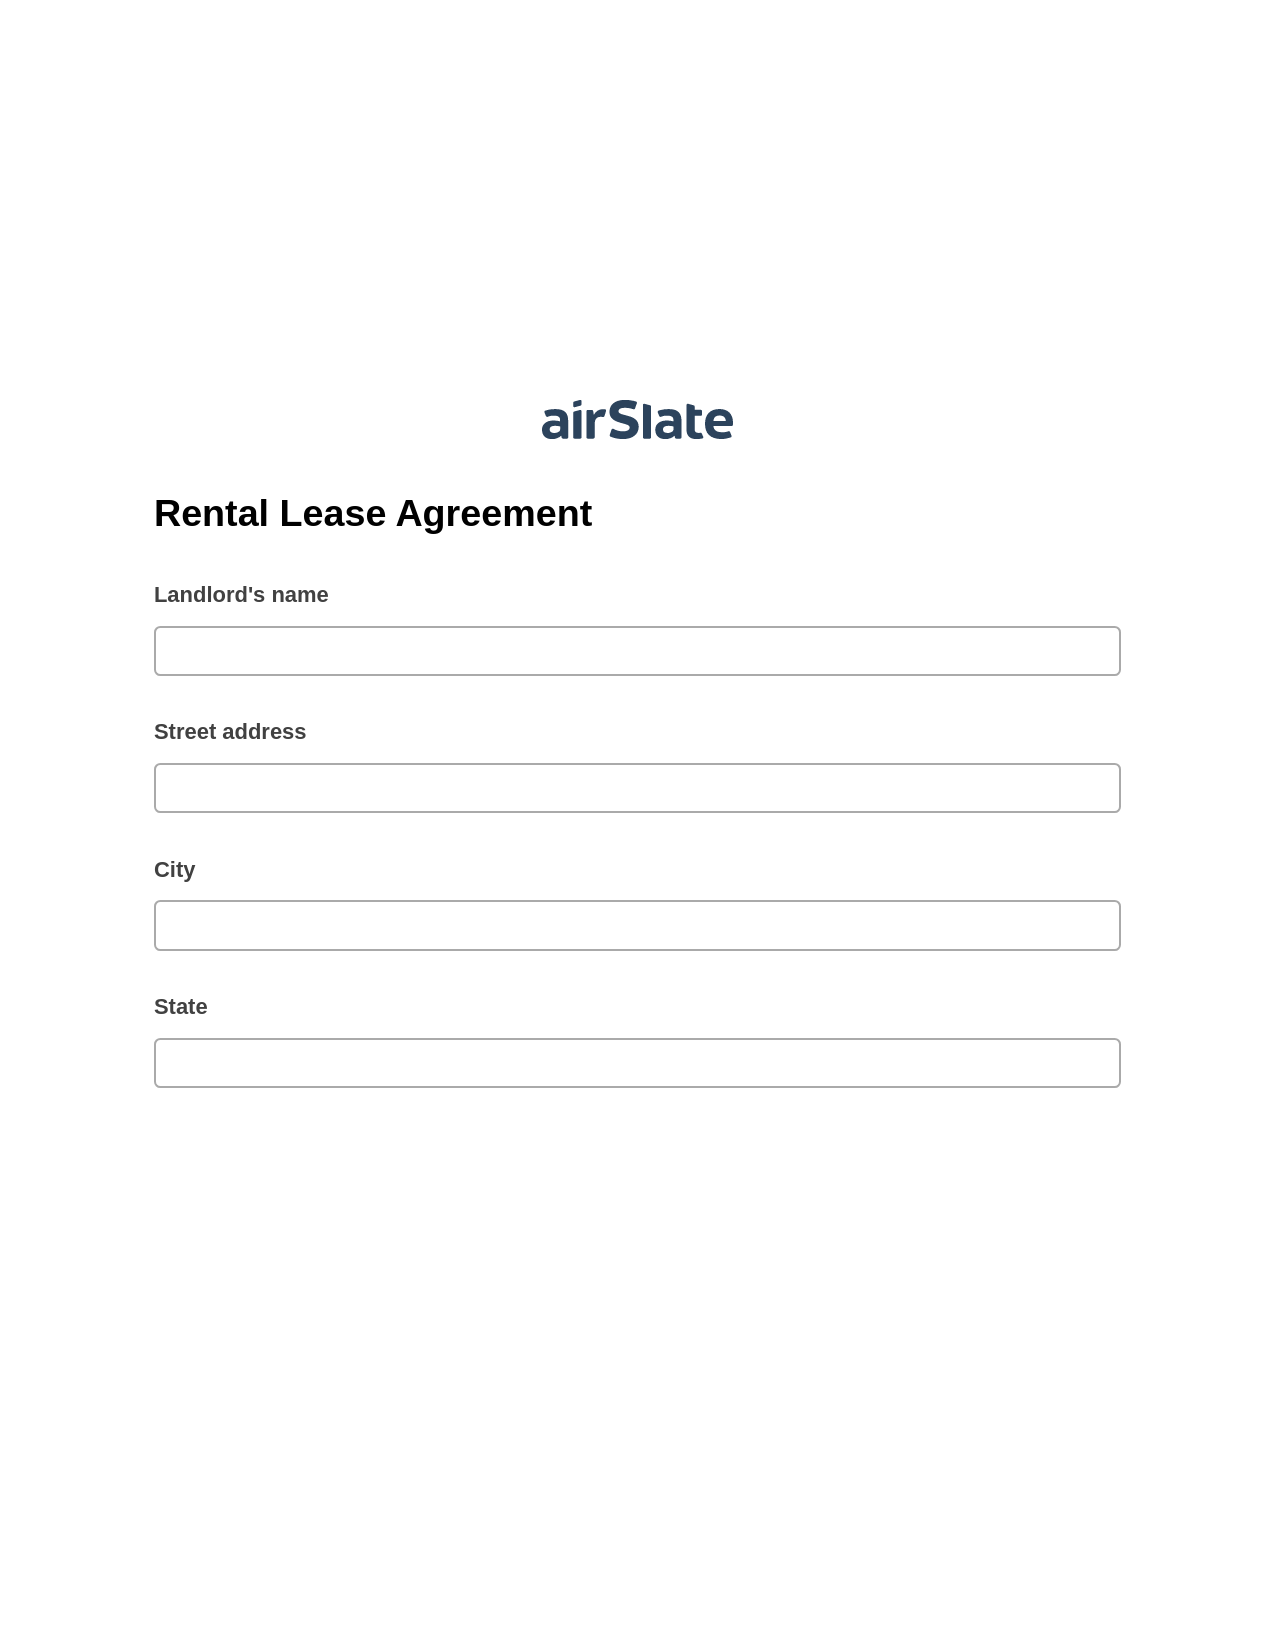 Rental Lease Agreement Pre-fill from Google Sheets Bot, Create QuickBooks invoice Bot, Export to Formstack Documents Bot